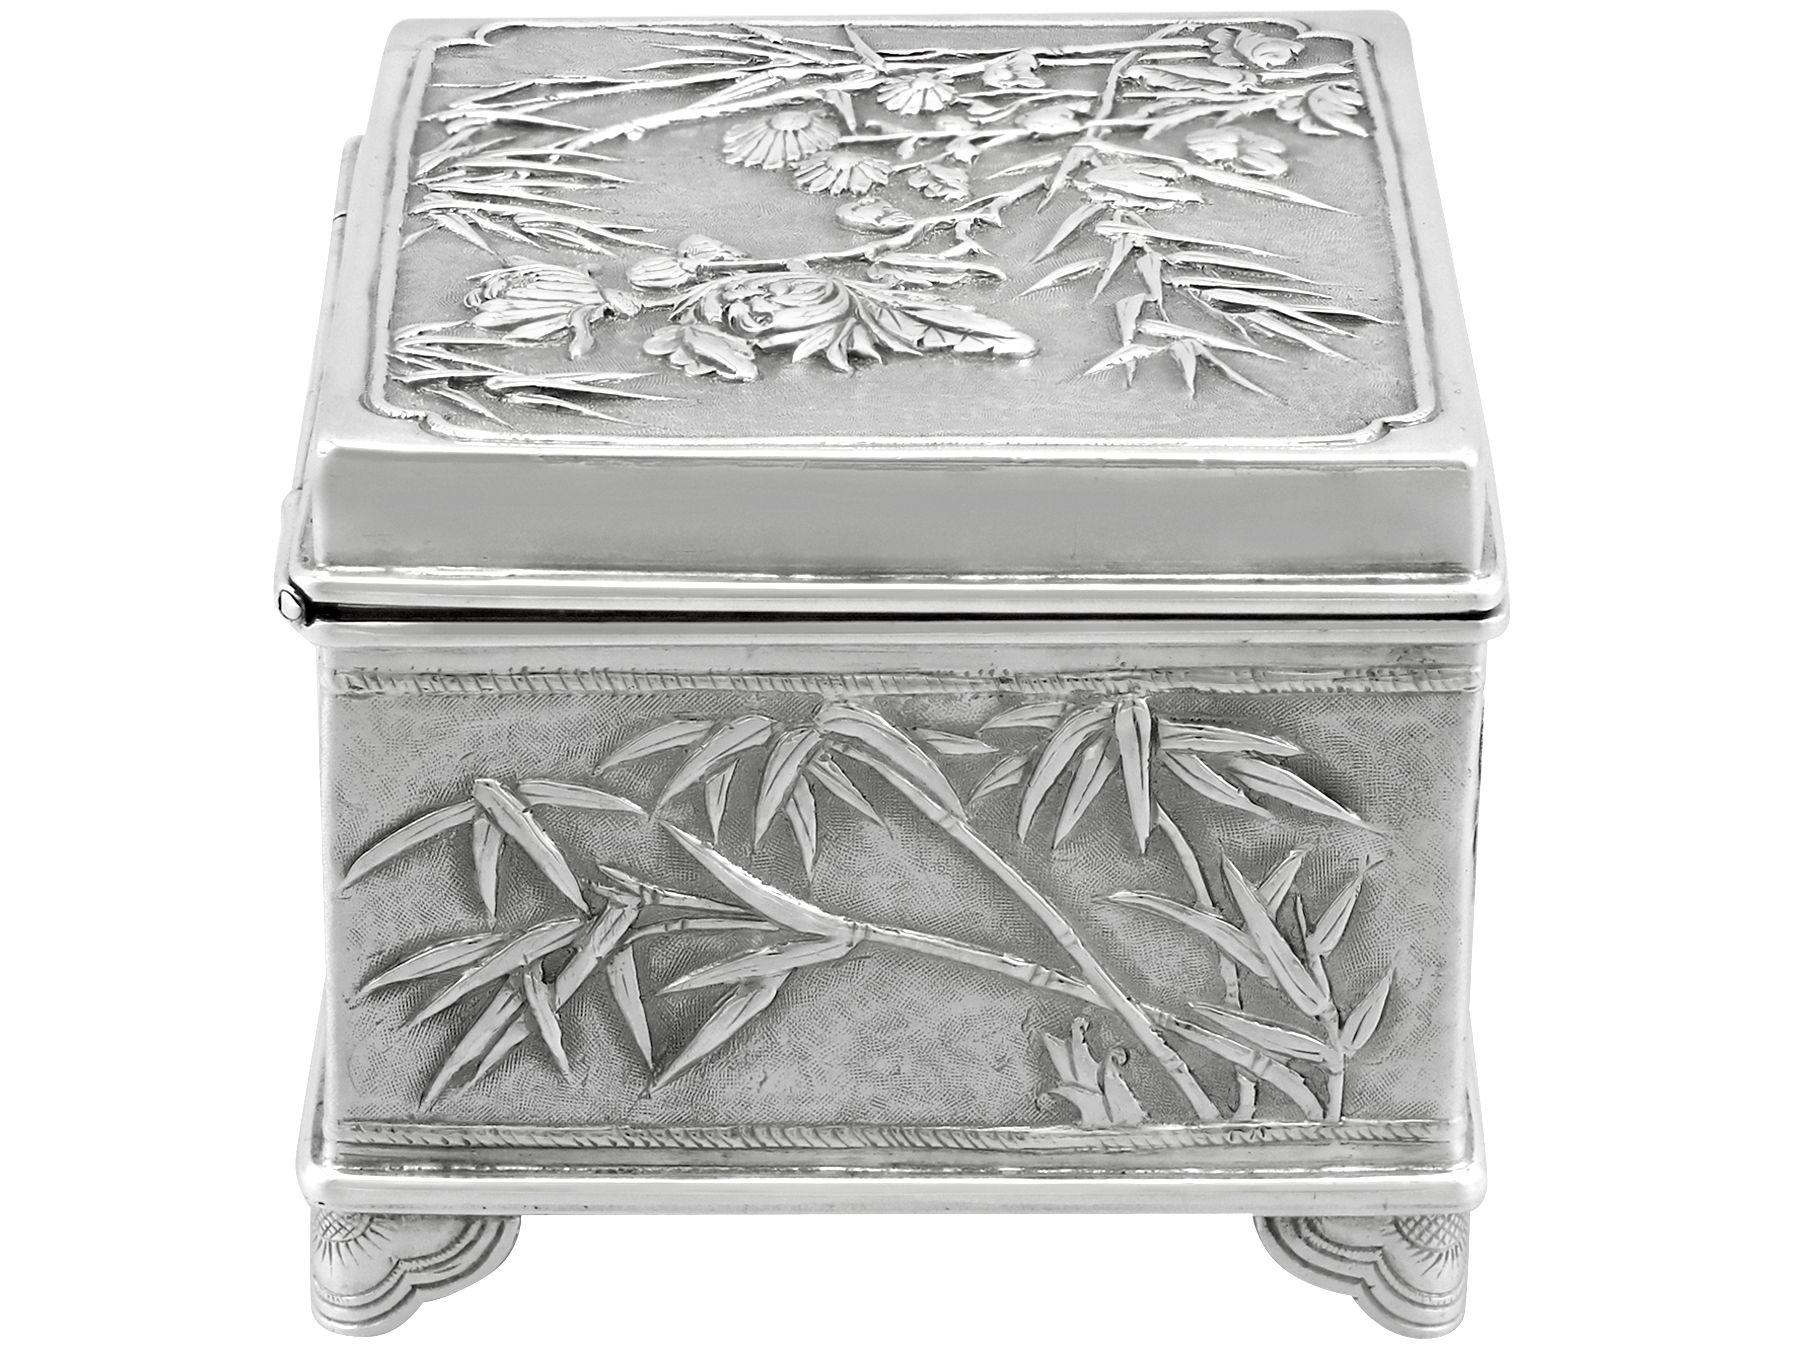 1900s Antique Chinese Export Silver Box In Excellent Condition For Sale In Jesmond, Newcastle Upon Tyne